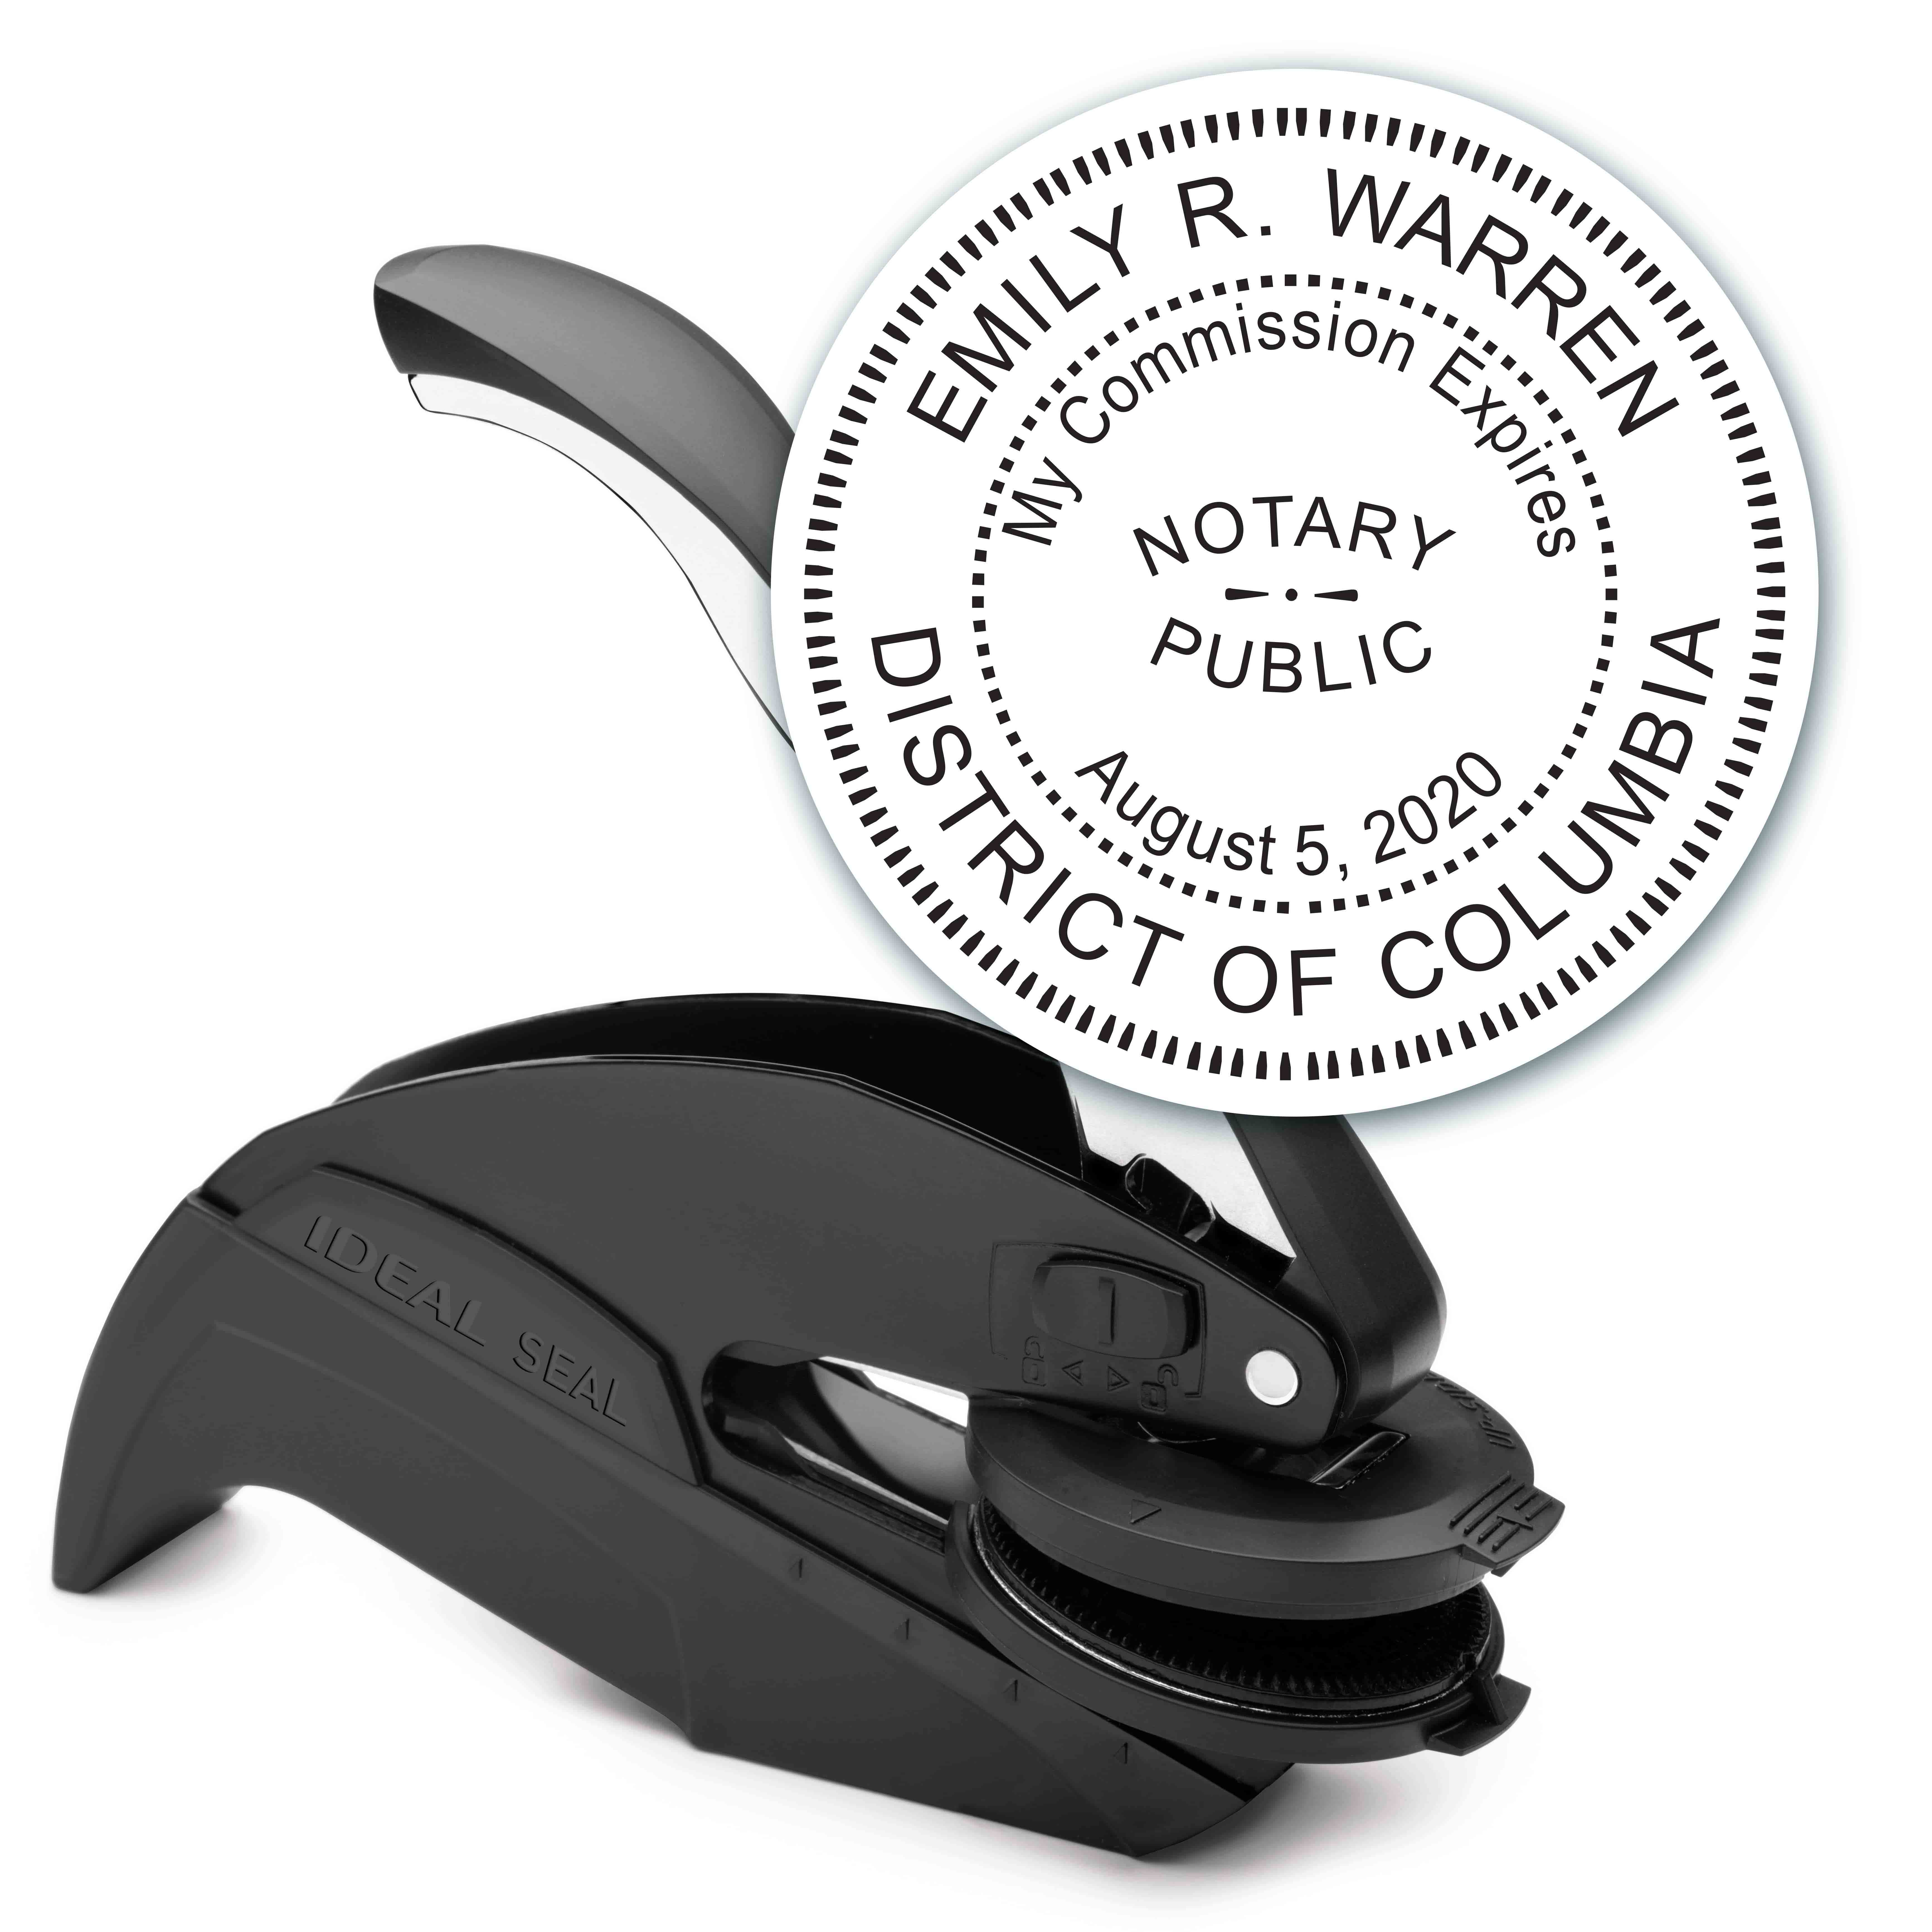 Notary Seal Round Embosser for District of Columbia - Includes Gold Burst Seal Labels (42 count)	